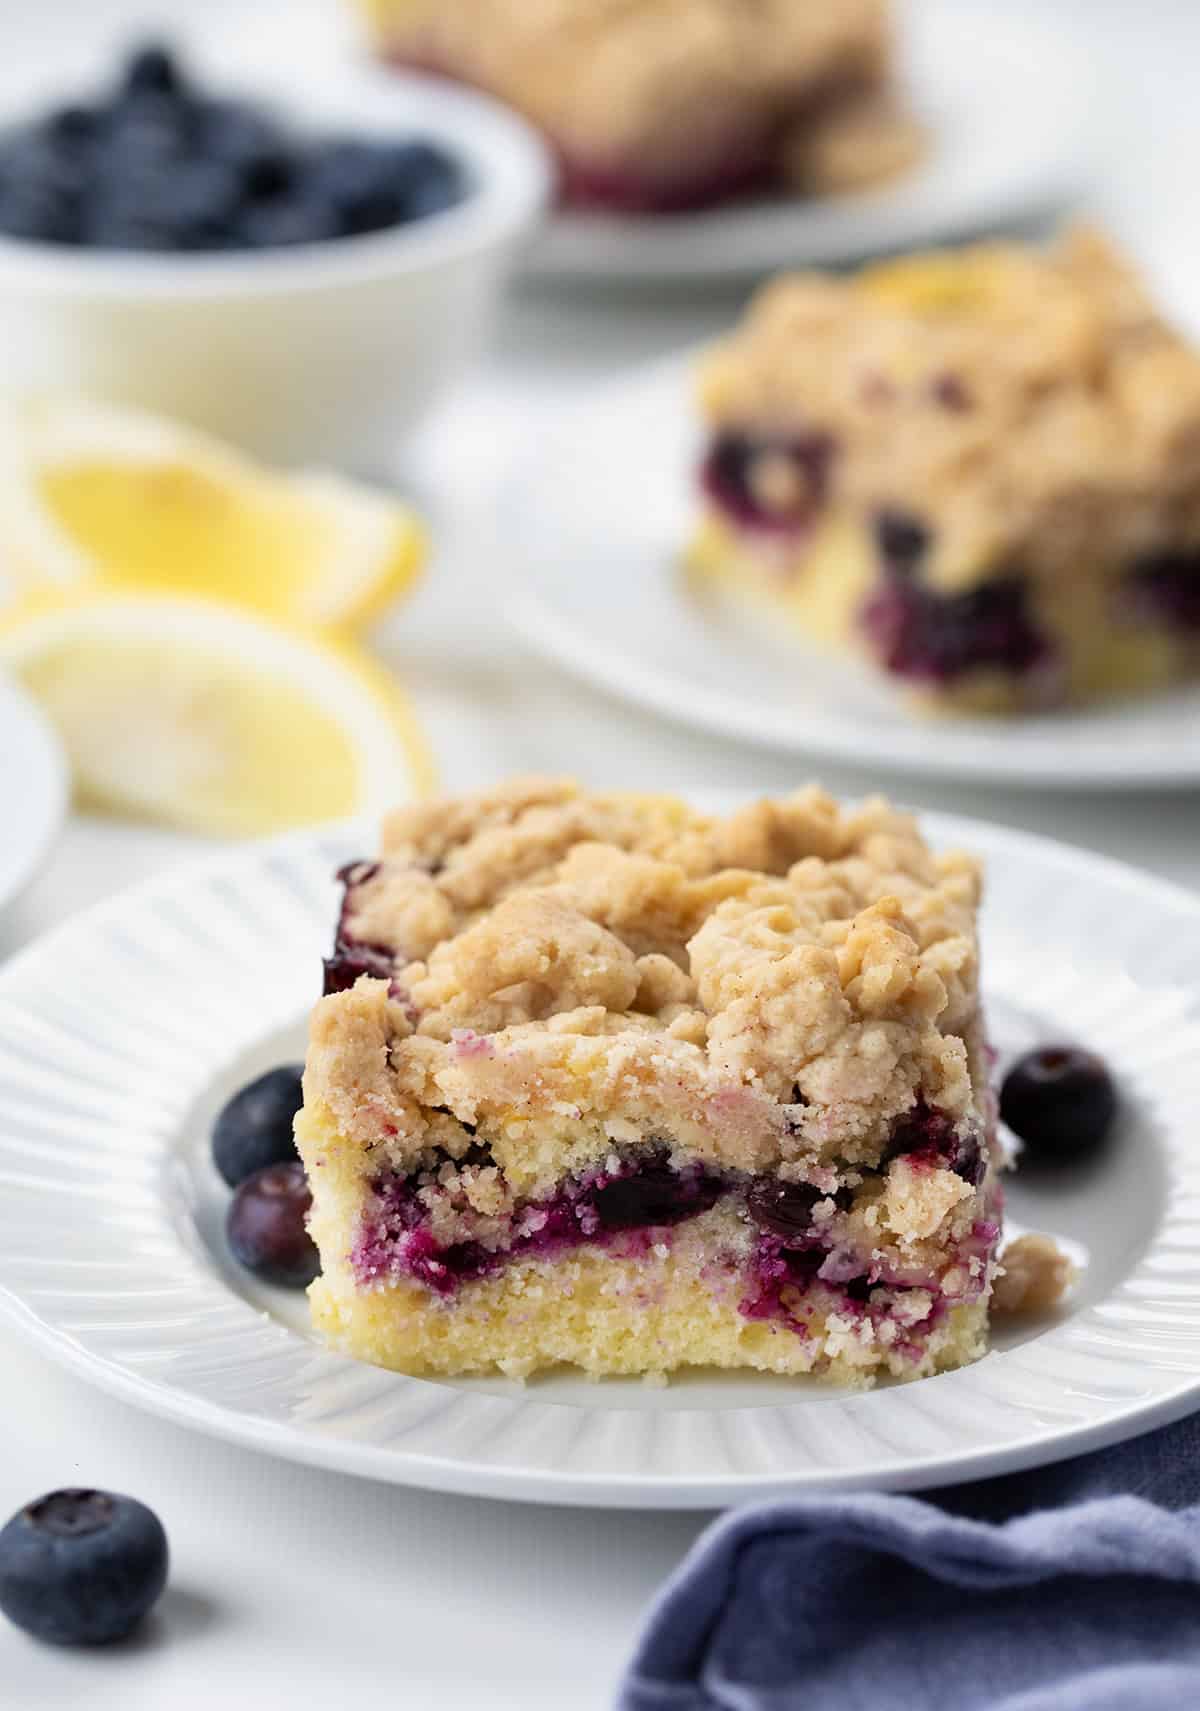 Piece of Blueberry Lemon Crumb Cake on a white plate showing crumb and blueberries.